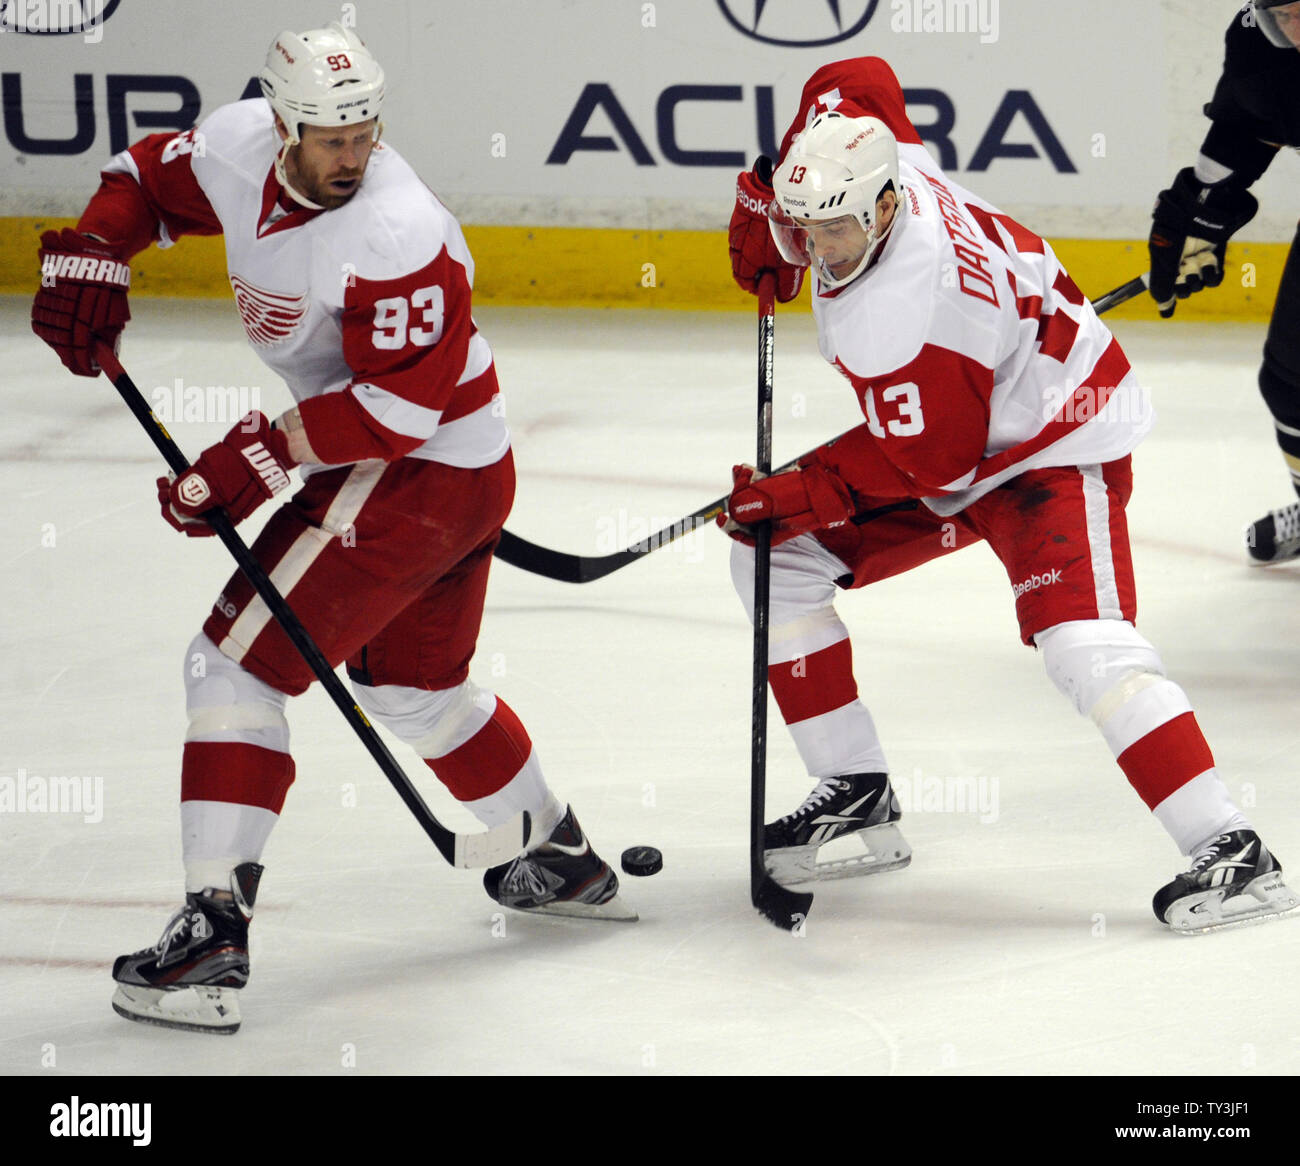 Detroit Red Wings left wing Johan Franzen (93) and Pavel Datsyuk (13) keep the puck away from the Anaheim Ducks in the first period at the Honda Center in Anaheim, California on March 24, 2013.  UPI/Lori Shepler. Stock Photo